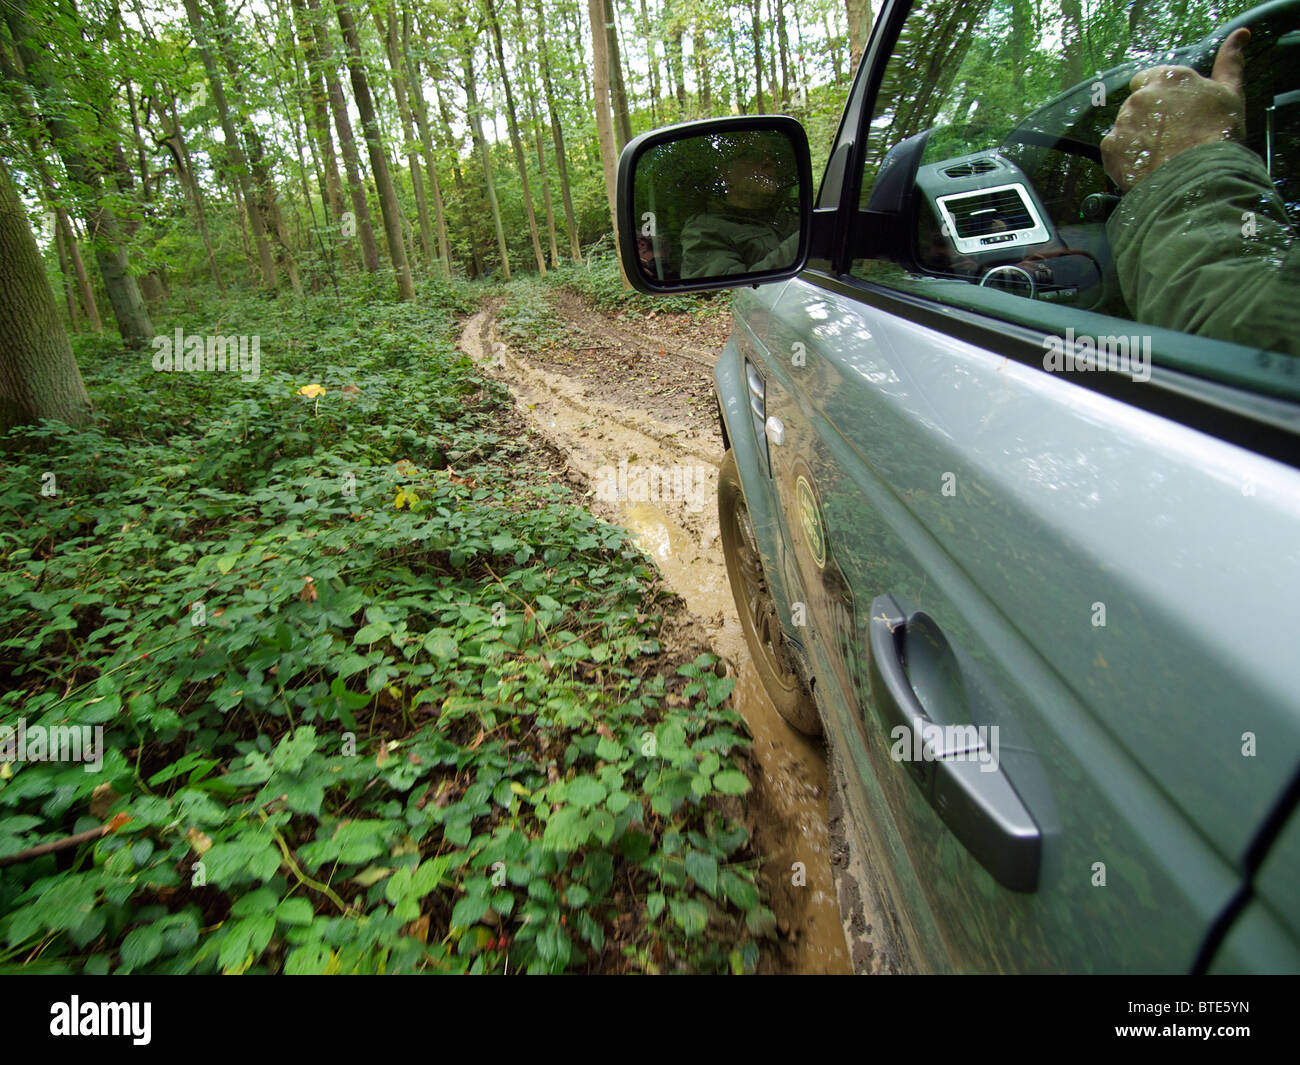 Range Rover Sport driving through a forest on an extremely muddy and slippery path. Domaine d'Arthey, Belgium Stock Photo